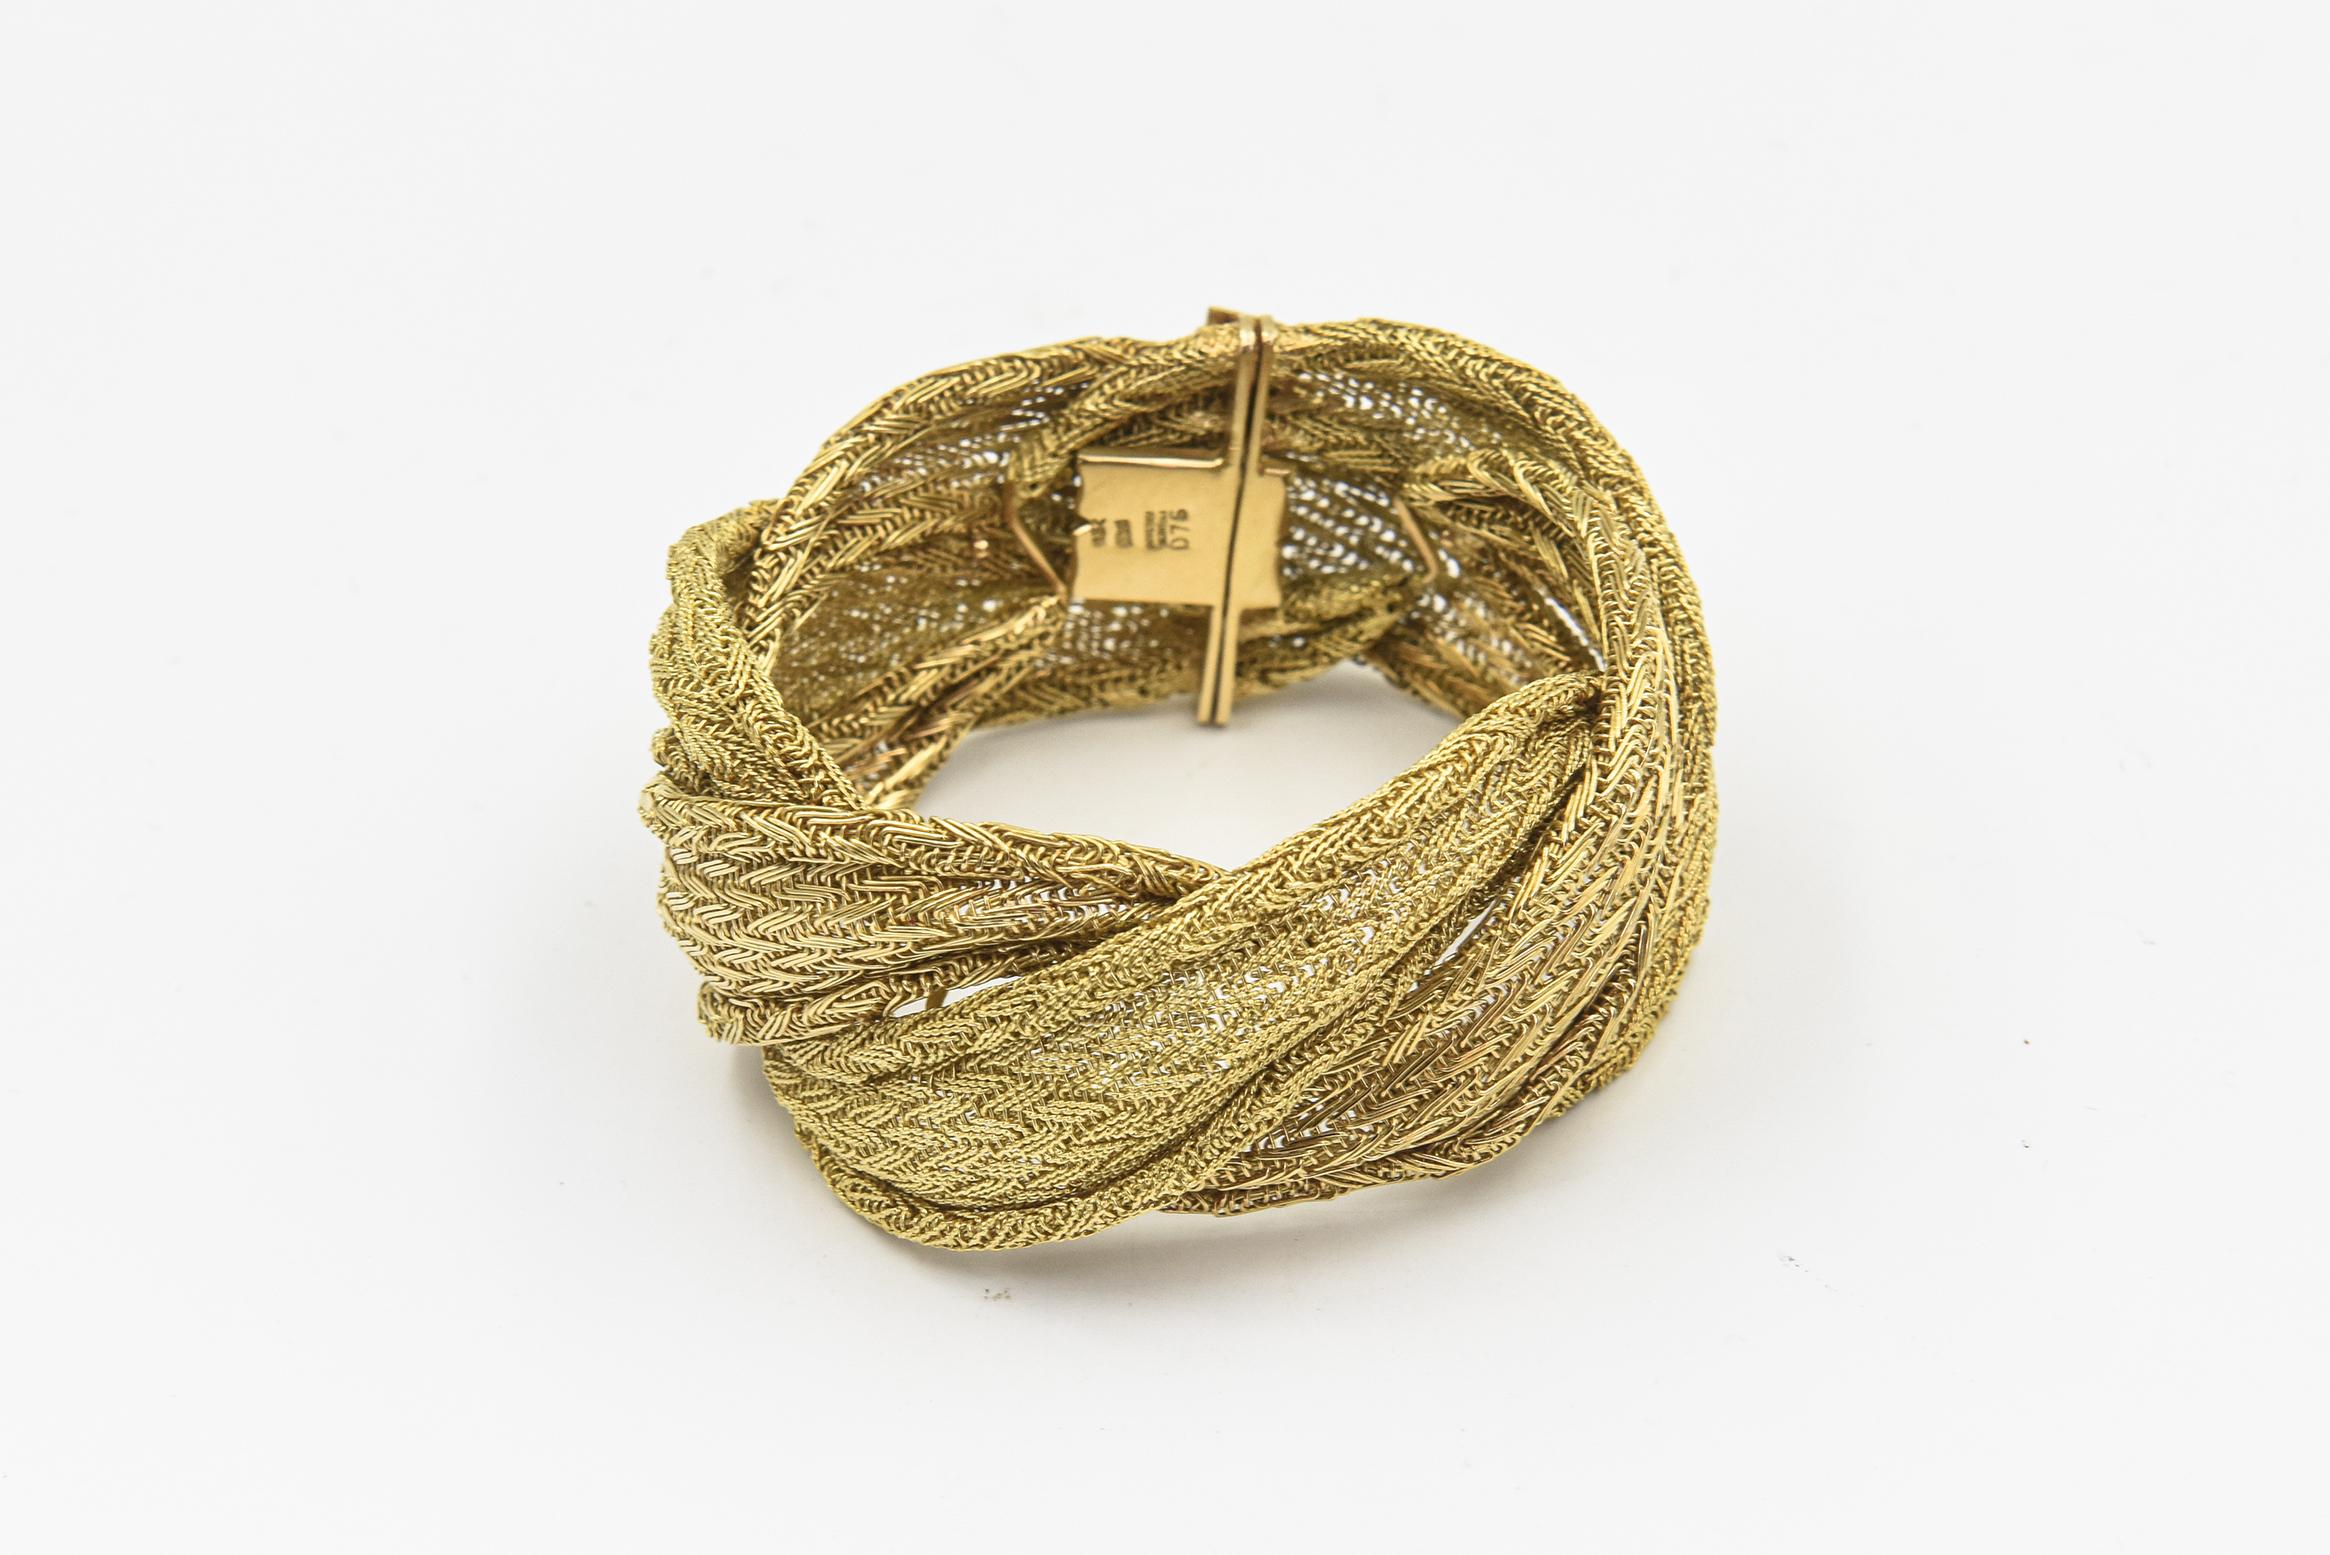 Wide Handmade Woven Yellow Gold Braid Bracelet In Good Condition For Sale In Miami Beach, FL